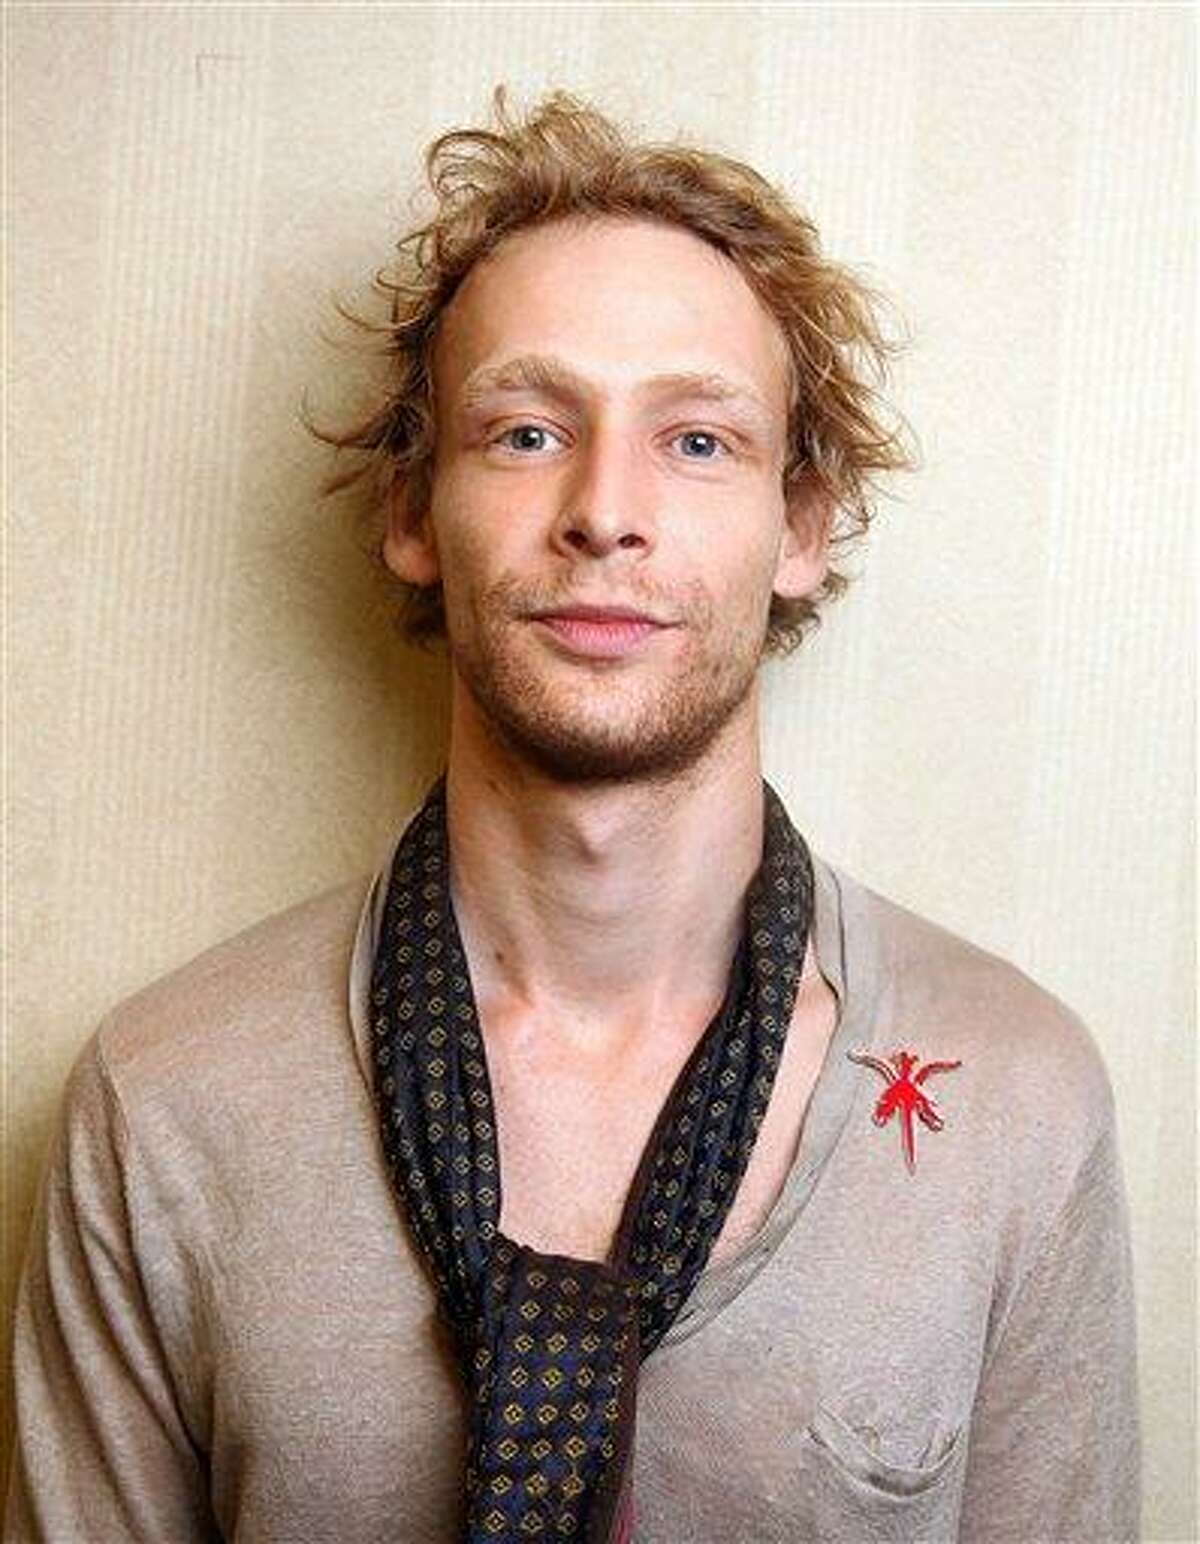 This 2011 file photo shows actor Johnny Lewis posing for a portrait during the 36th Toronto International Film Festival in Toronto, Canada. Authorities say Lewis fell to his death after killing an elderly Los Angeles woman. Lewis appeared in the FX television show "Sons of Anarchy" for two seasons. Associated Press